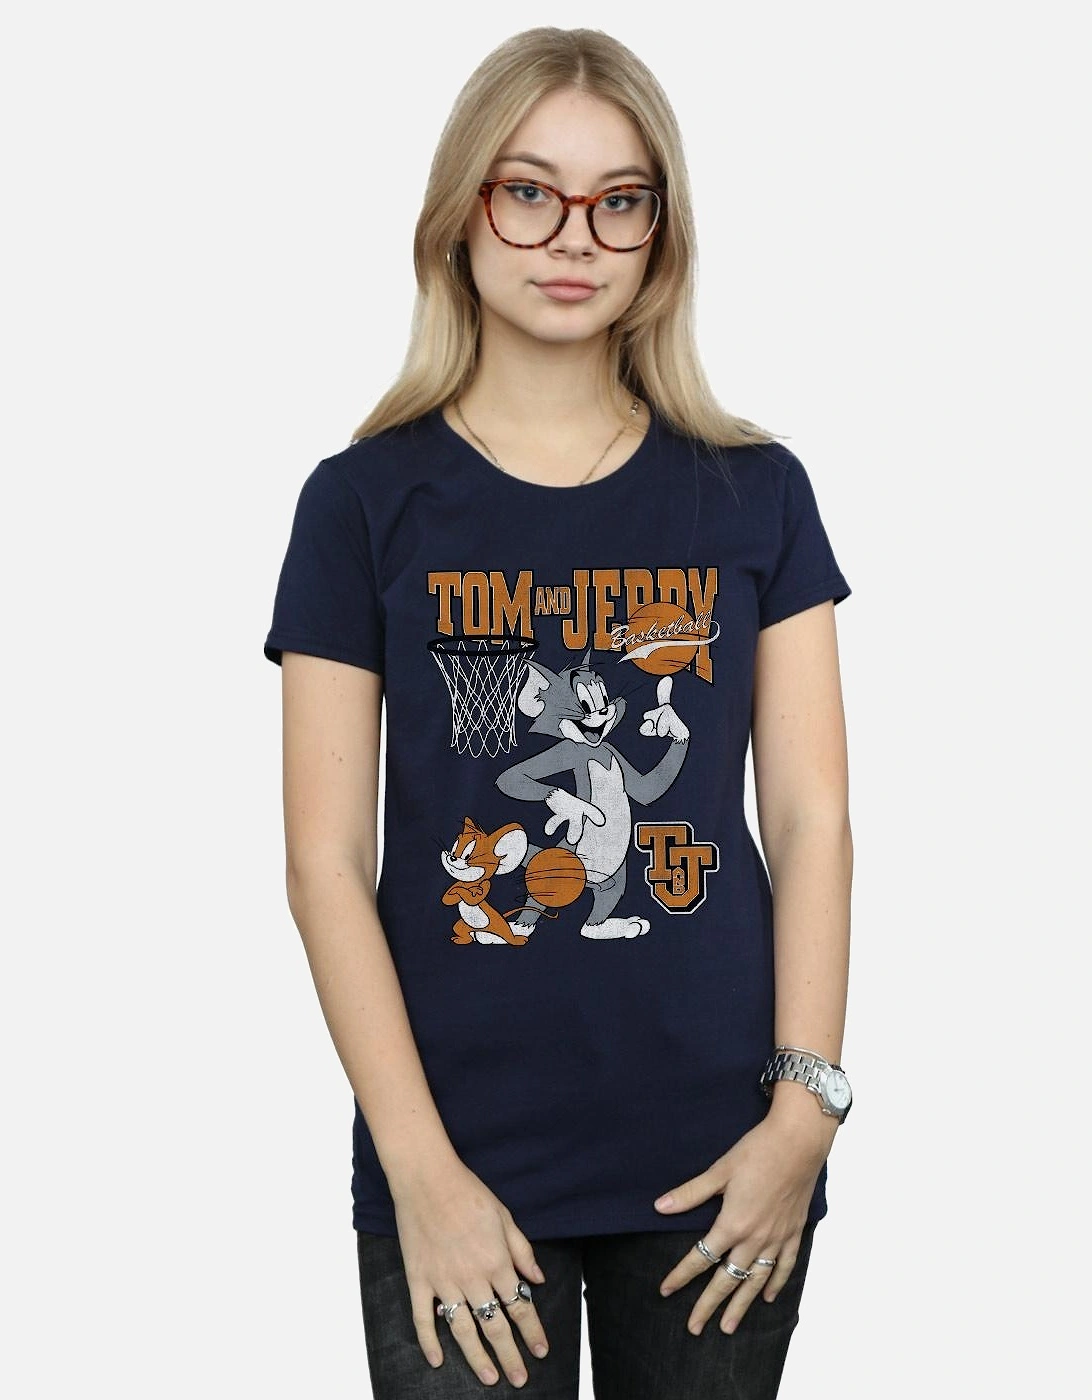 Tom and Jerry Womens/Ladies Spinning Basketball Cotton T-Shirt